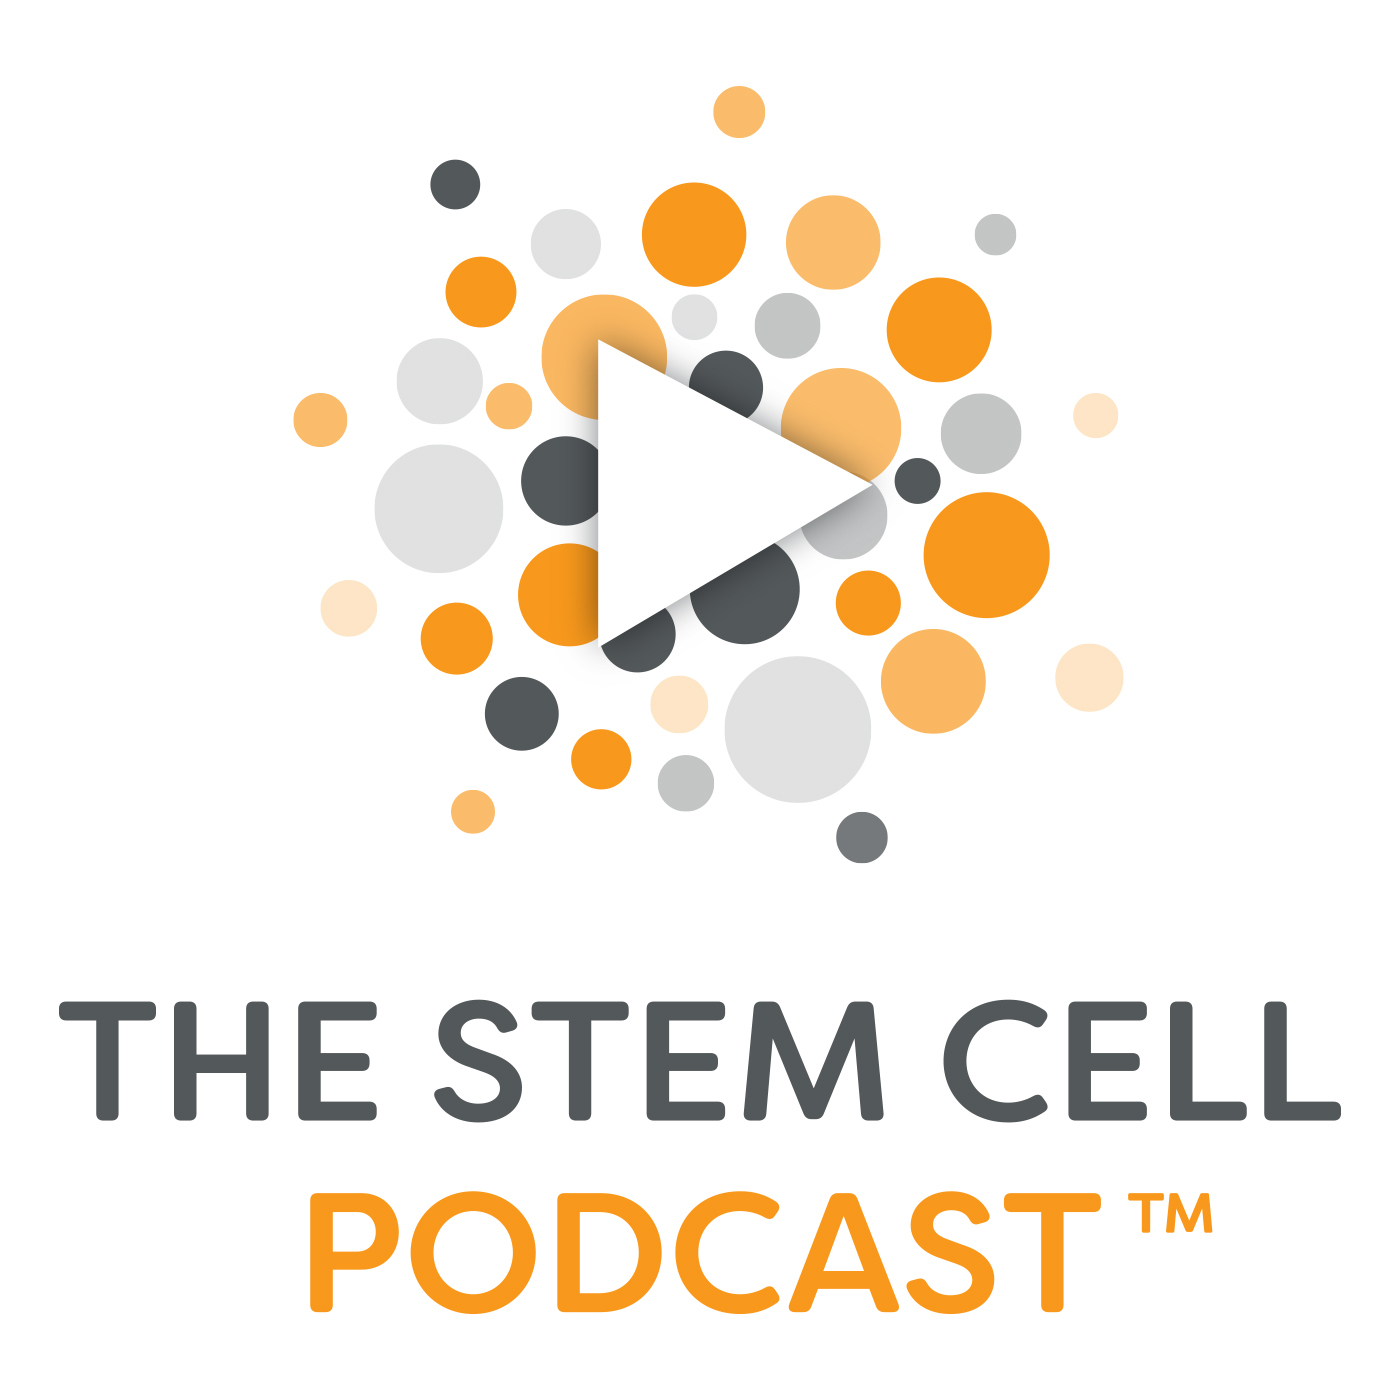 Ep. 249: “Live at NYSCF: Overcoming Obstacles in Stem Cell Research” Featuring Drs. Laura Andres-Martin, Daniel Paull, and Raeka Aiyar